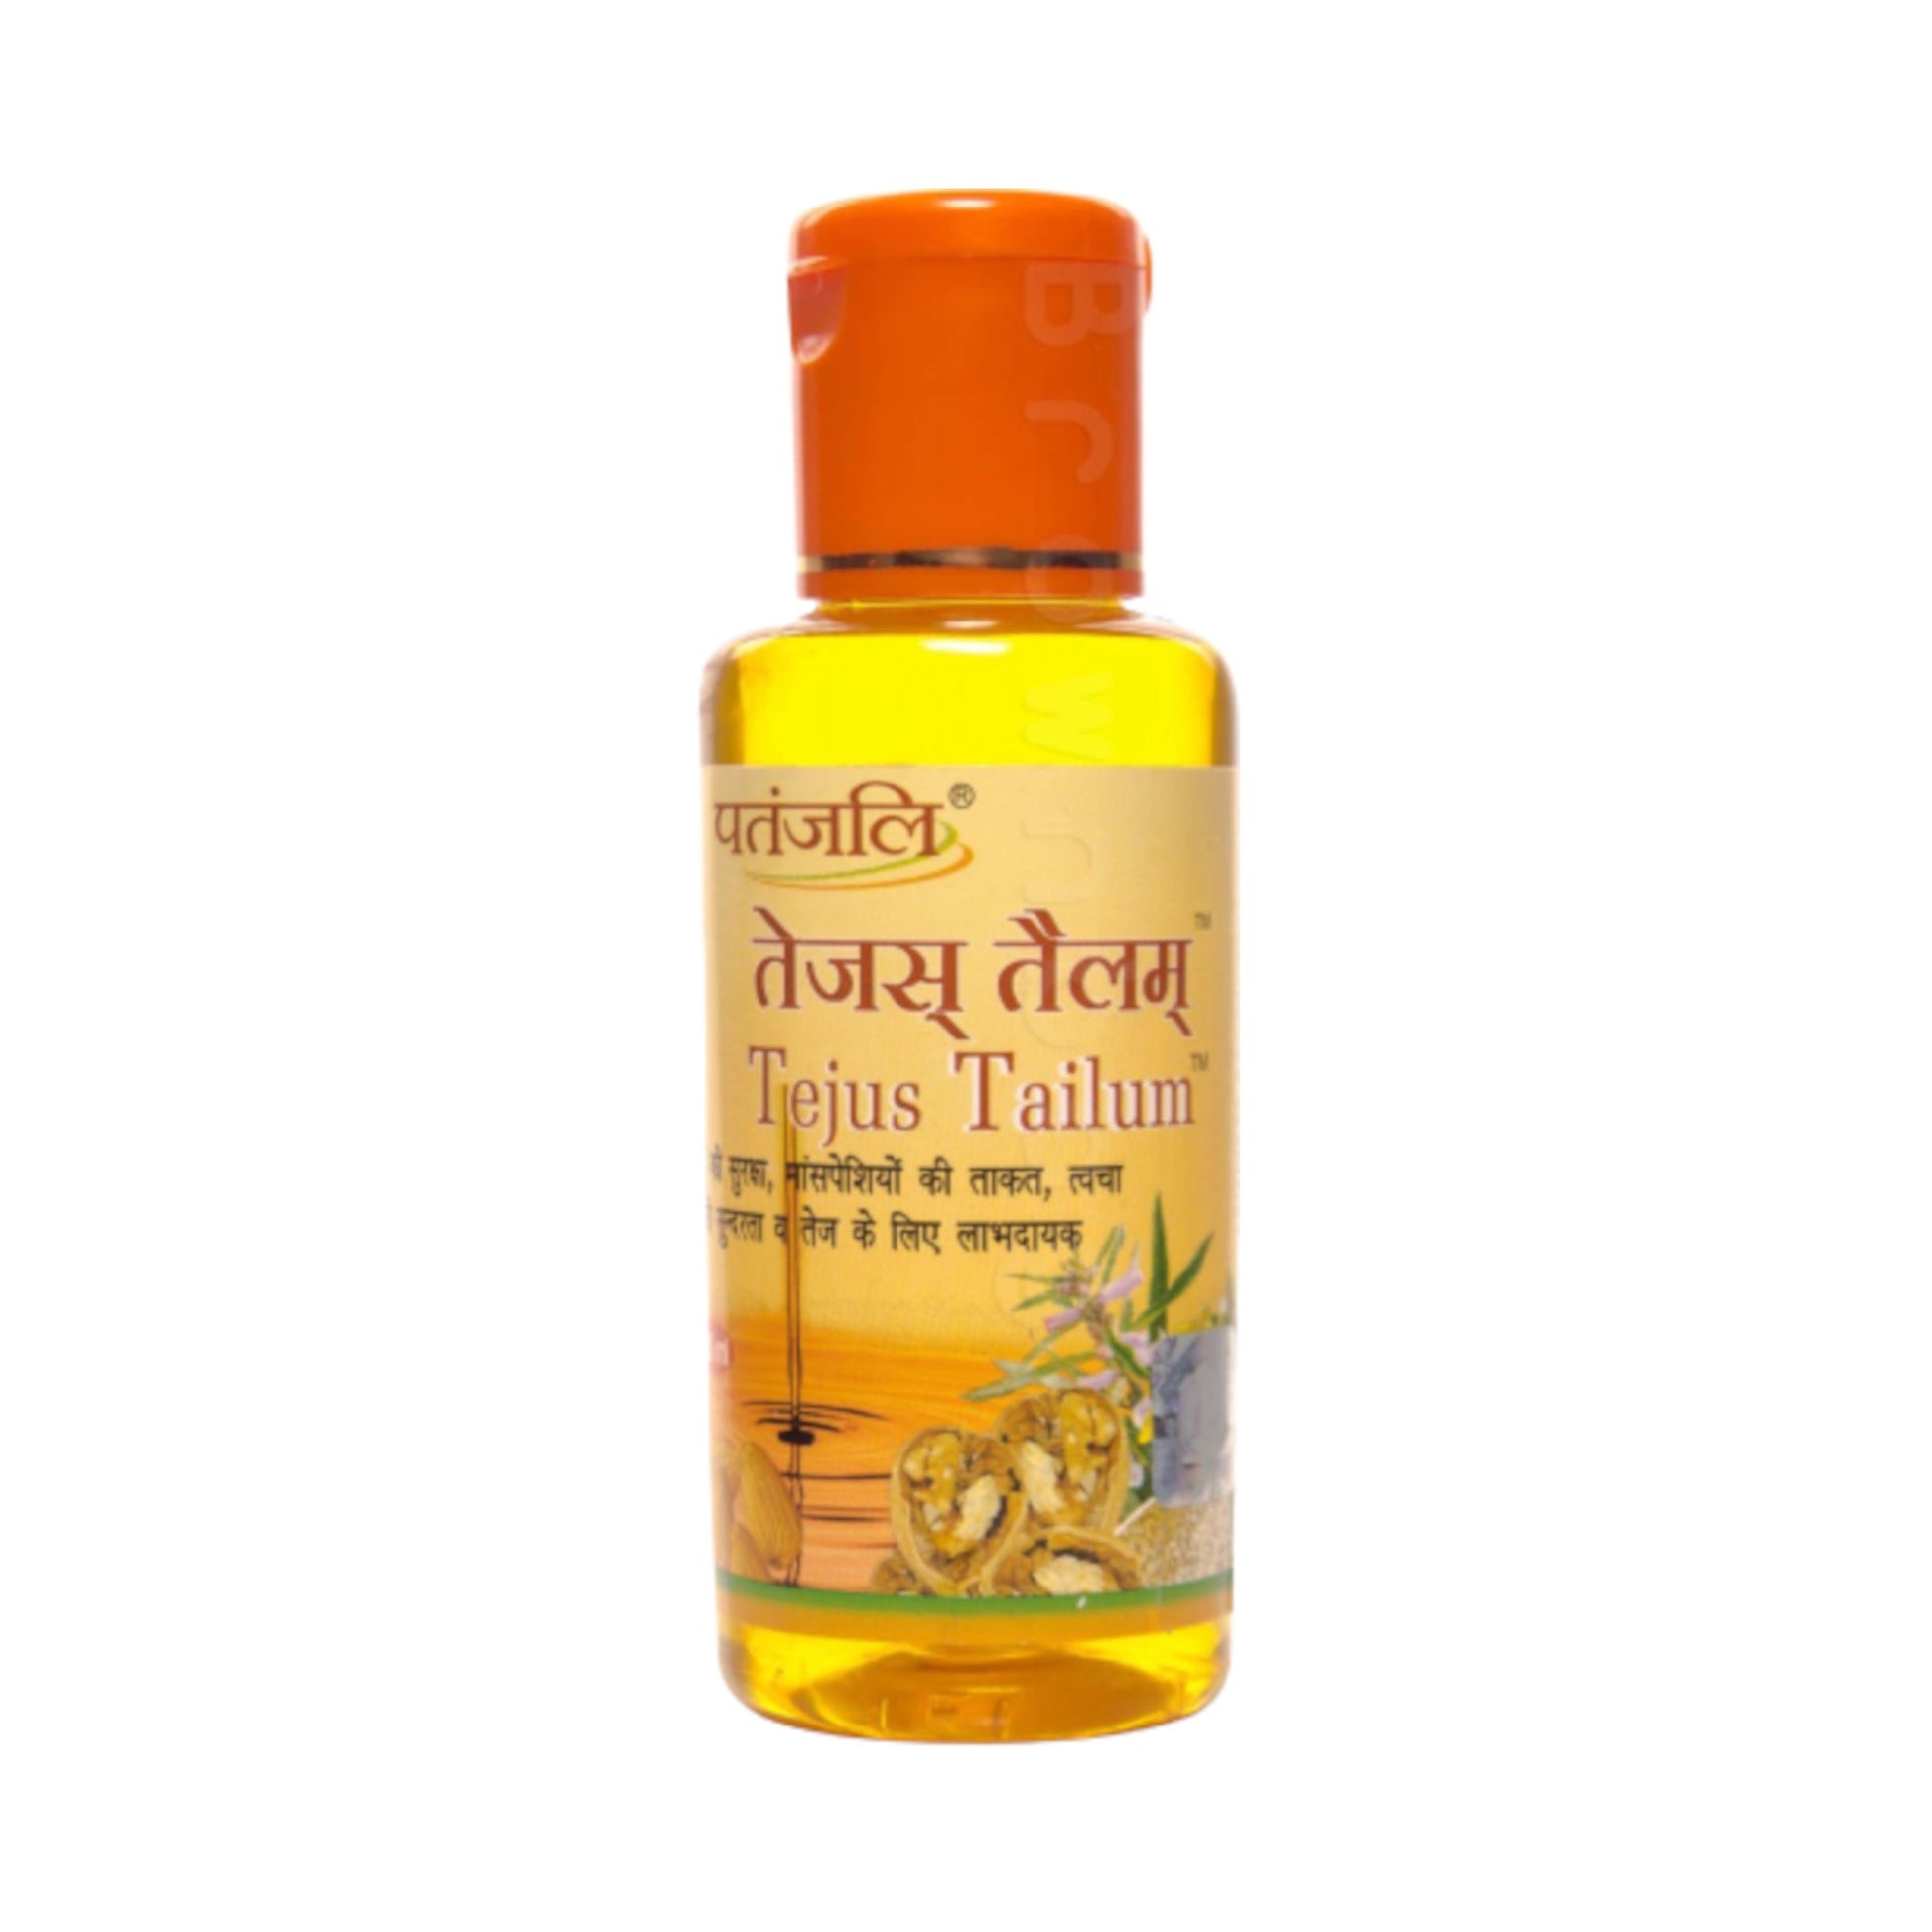 Image for Divya Patanjali Tejus Tailum Oil - 100 ml. Natural oil for skin, hair, and relief from rheumatoid arthritis.